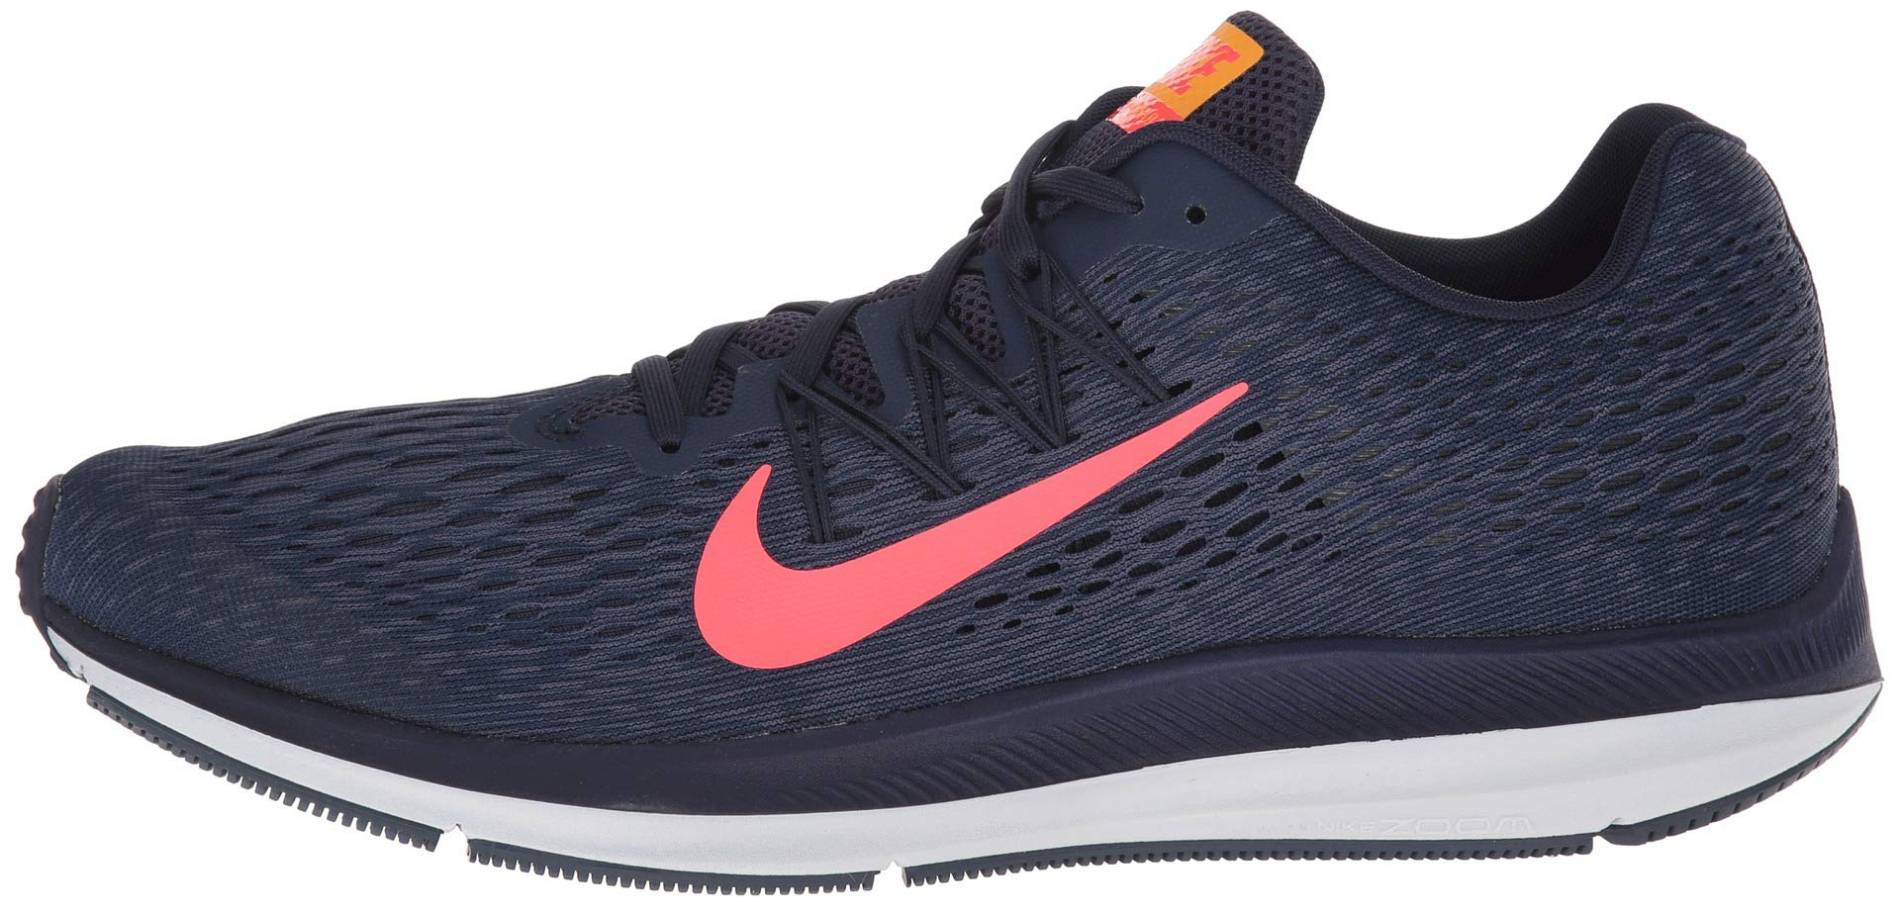 Nike Air Zoom Winflo 5 - Deals (£80), Facts, Reviews (2021 ...